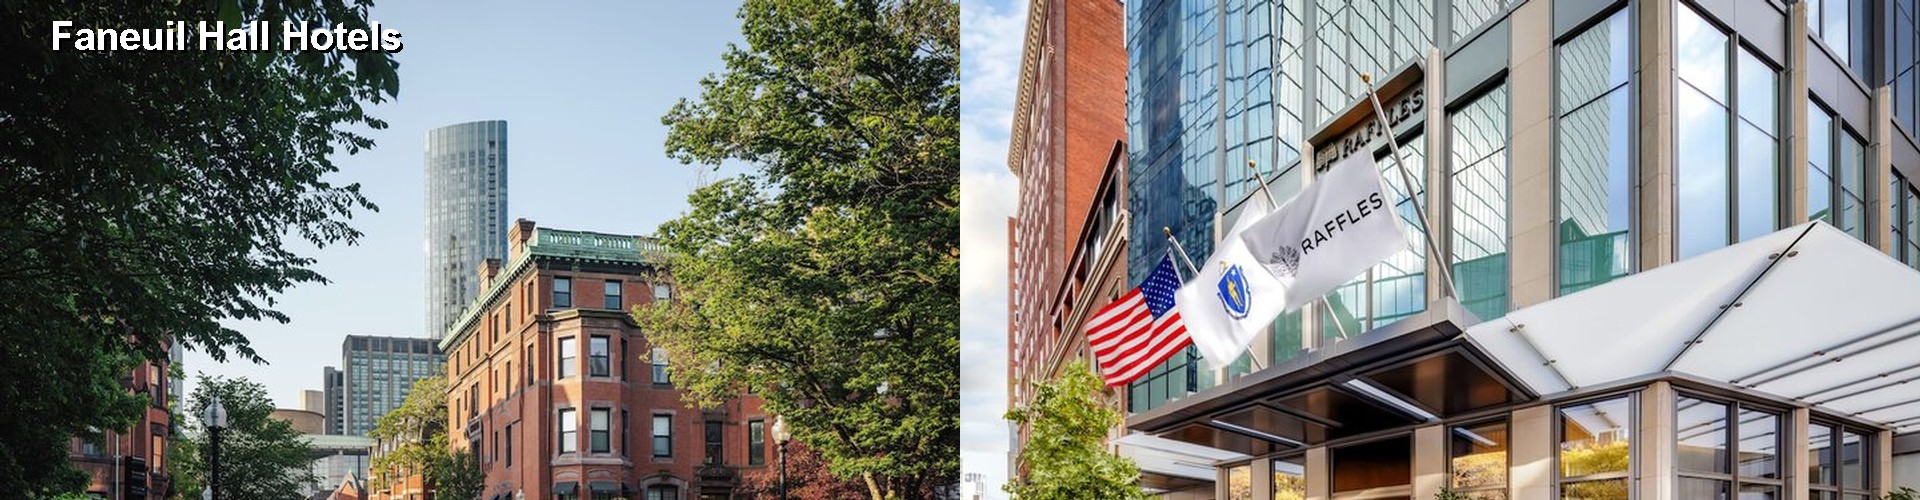 5 Best Hotels near Faneuil Hall